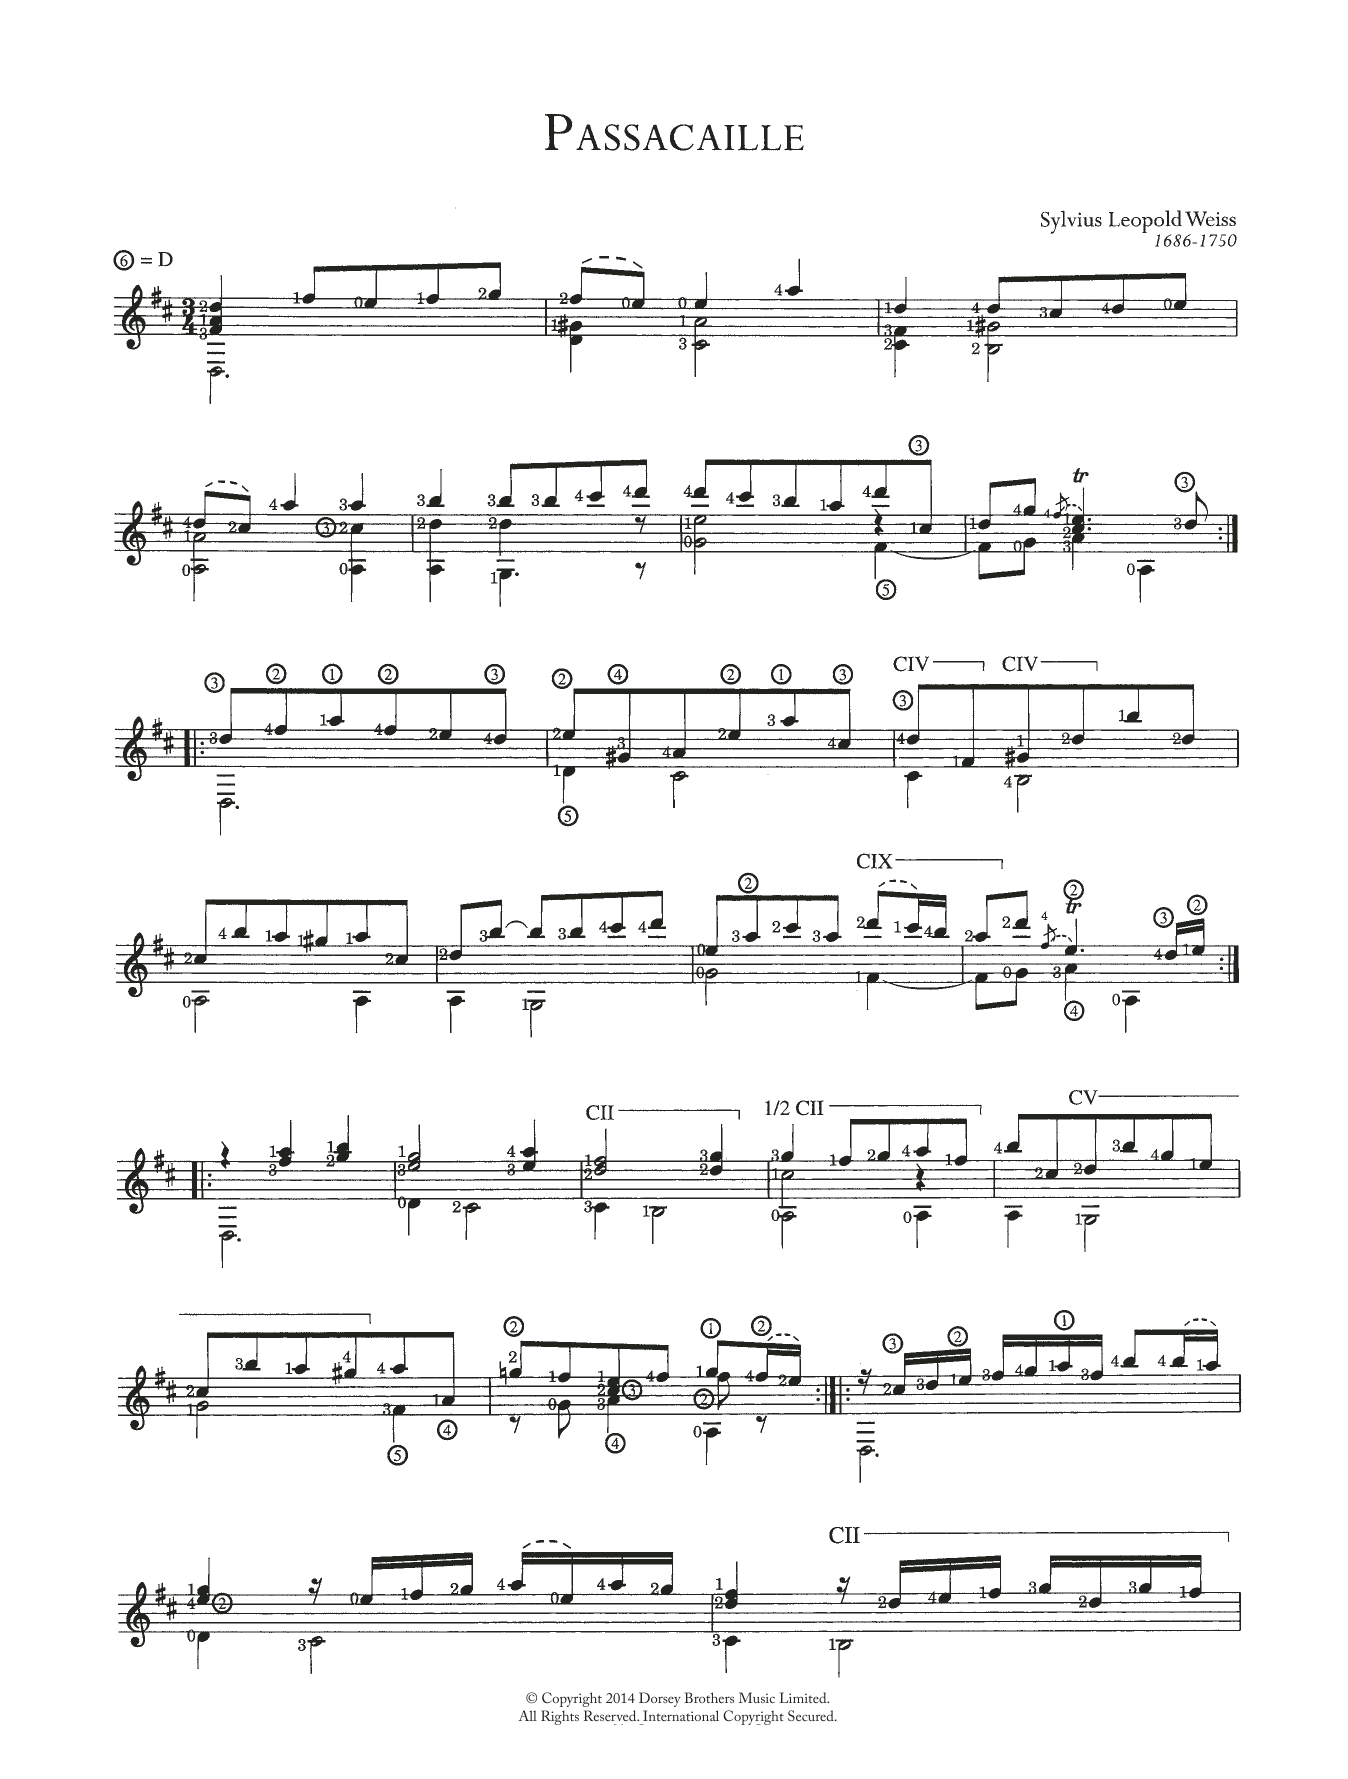 Download Sylvius Leopold Weiss Passacaille Sheet Music